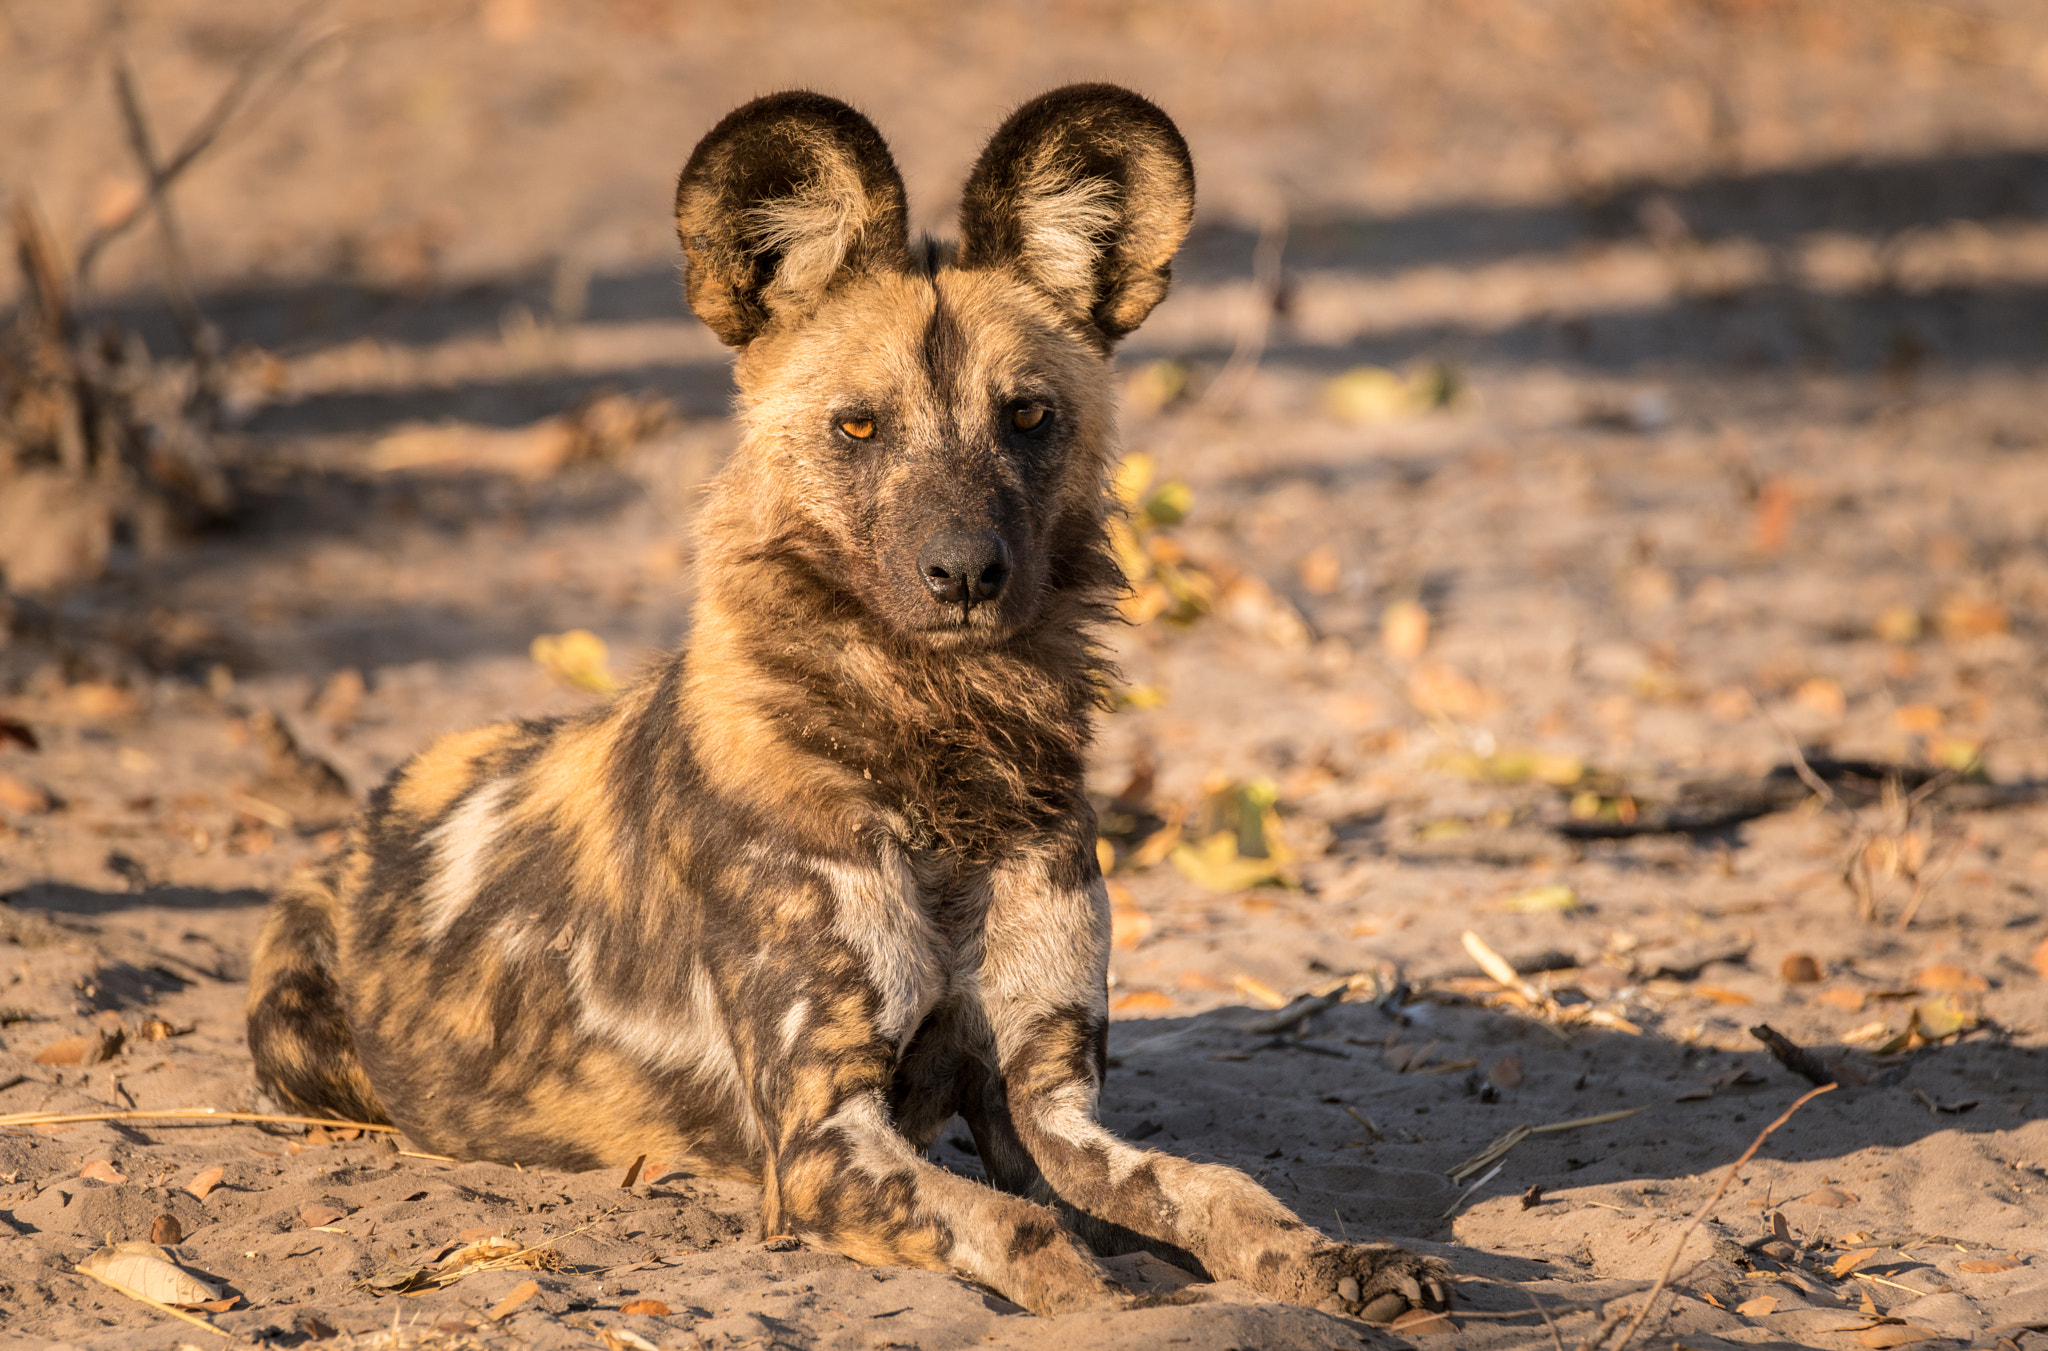 Sony a7R II sample photo. Wild dog in repose photography